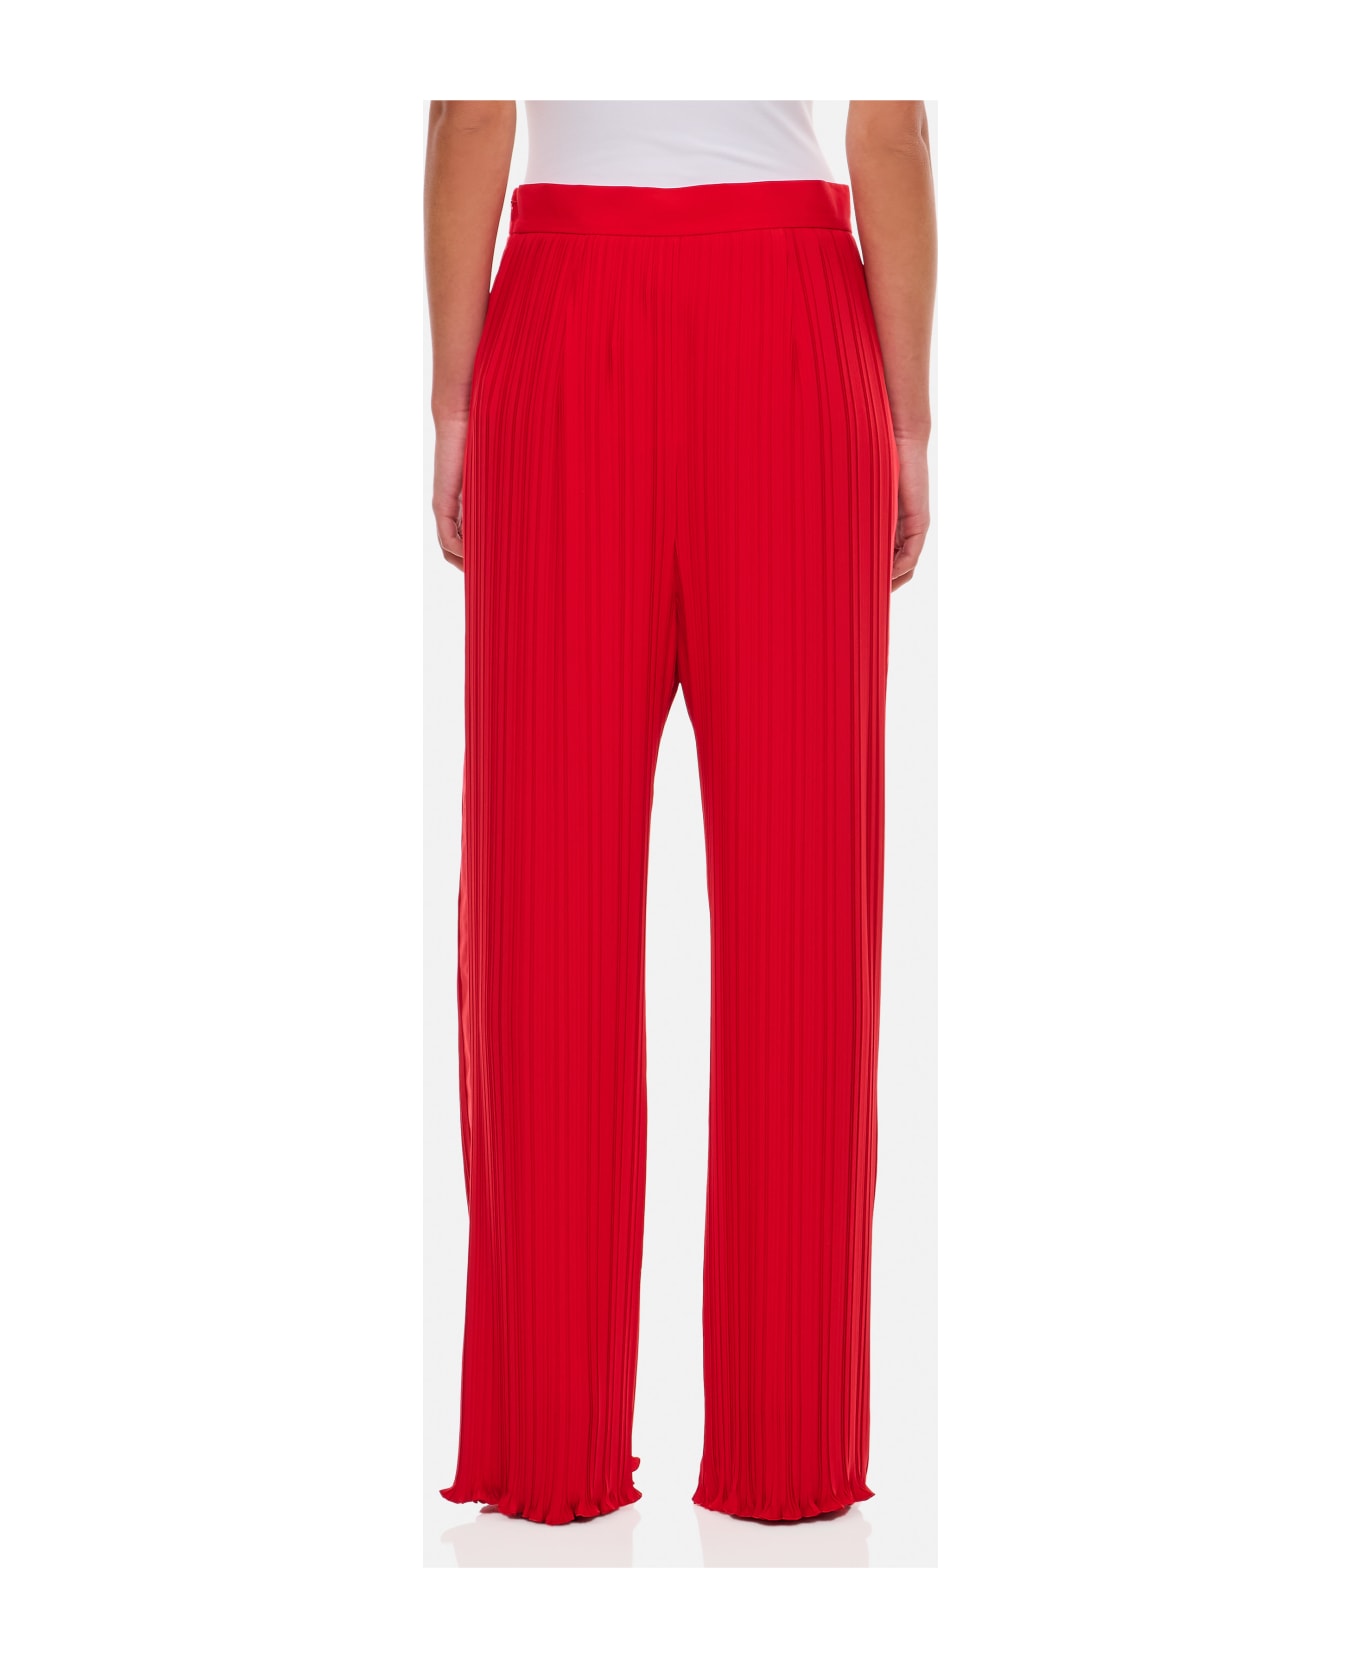 Lanvin Pleated Pants - Red ボトムス